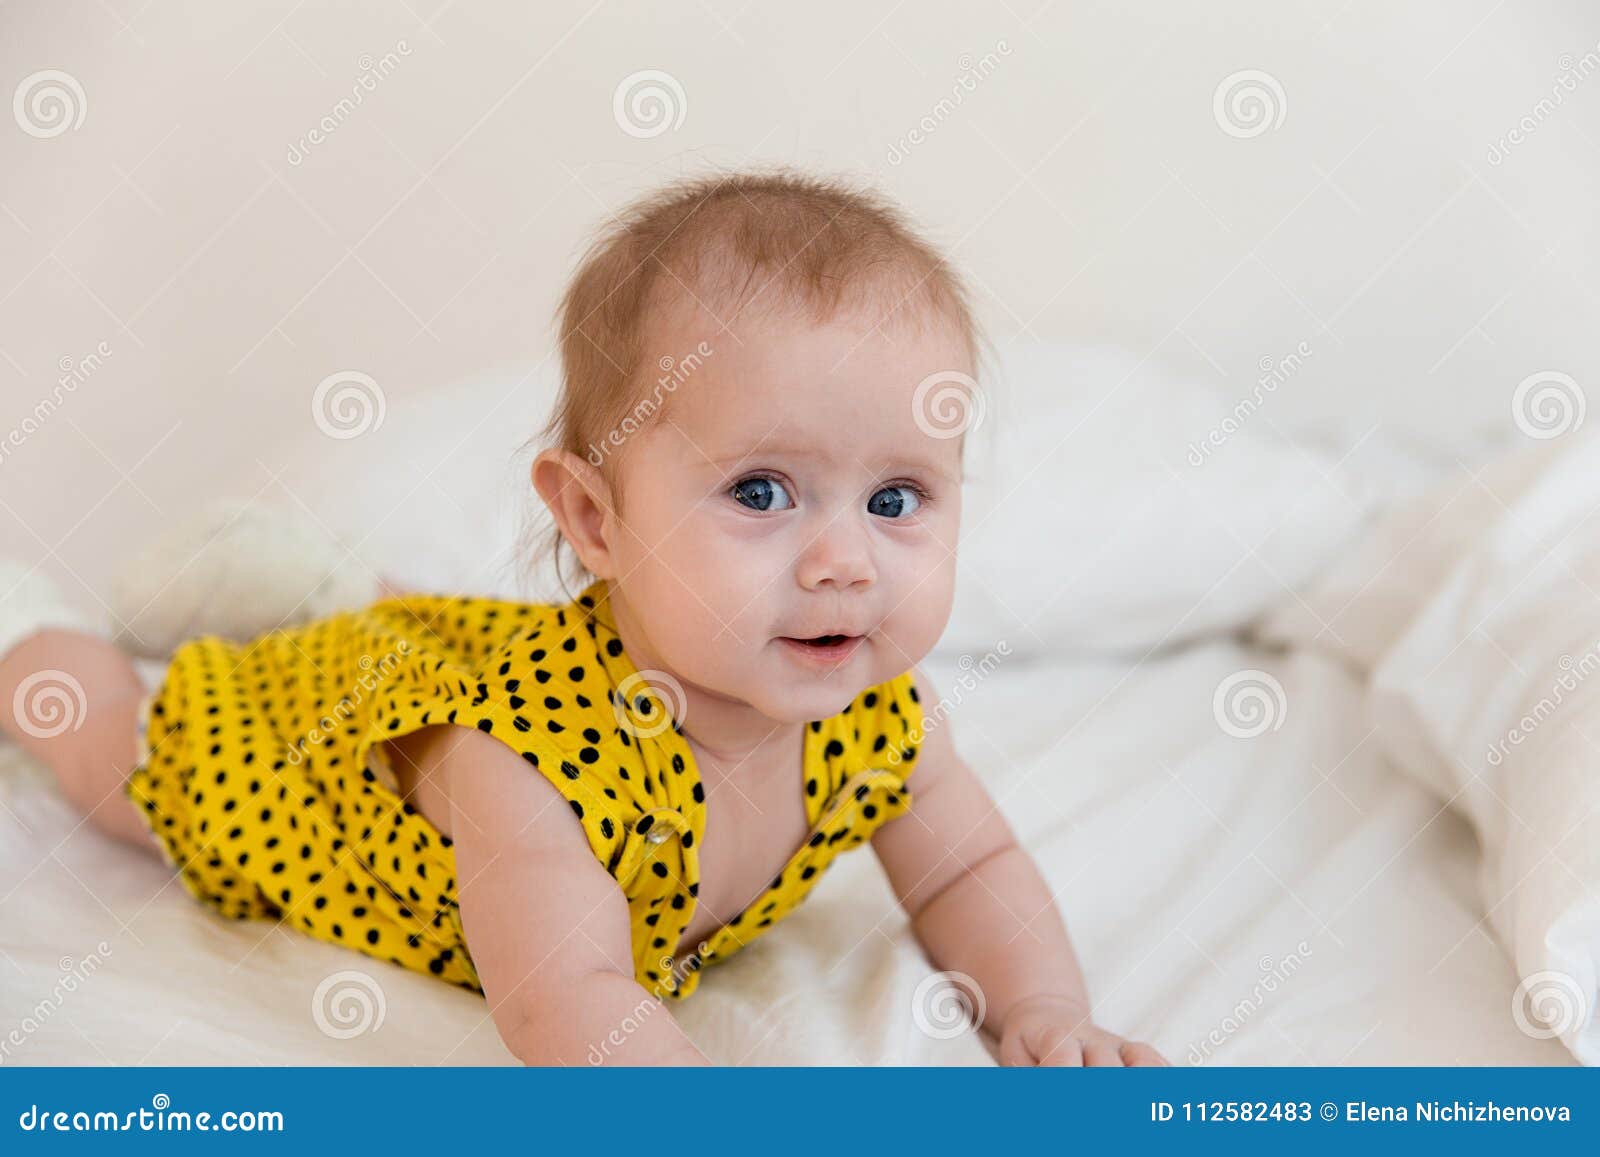 Newborn Infant Baby Stock Image Image Of Care Healthy 112582483